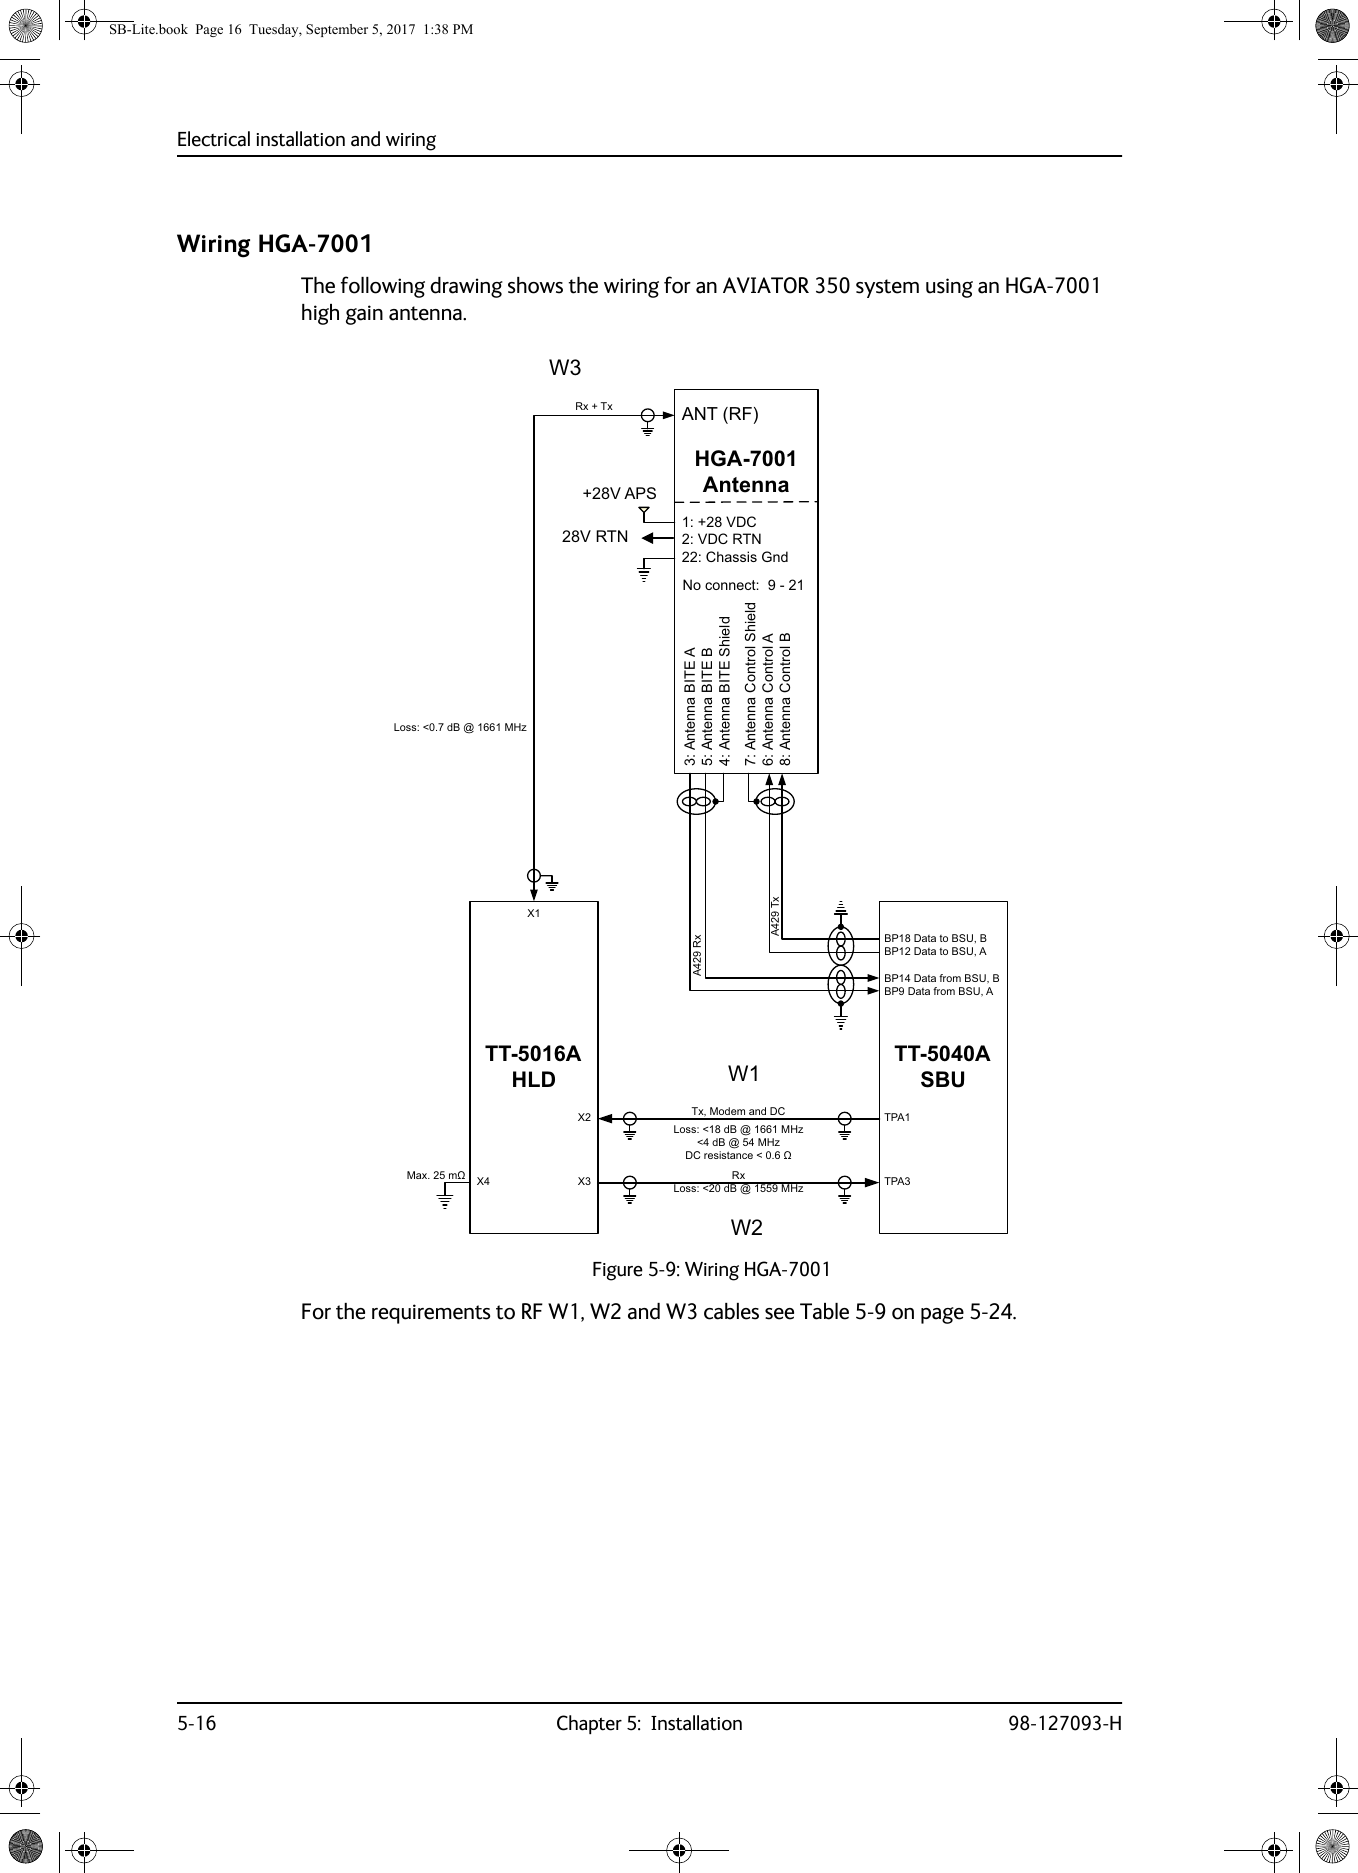 Electrical installation and wiring5-16 Chapter 5:  Installation 98-127093-HWiring HGA-7001The following drawing shows the wiring for an AVIATOR 350 system using an HGA-7001 high gain antenna.For the requirements to RF W1, W2 and W3 cables see Table  5-9 on page  5-24.Figure 5-9: Wiring HGA-700177$+/&apos;+*$$QWHQQD;77$6%8$7[$5[73$73$;;7[0RGHPDQG&apos;&amp;5[5[7[ $175)1RFRQQHFW9$36$QWHQQD%,7($$QWHQQD%,7(%$QWHQQD%,7(6KLHOG$QWHQQD&amp;RQWURO6KLHOG$QWHQQD&amp;RQWURO$$QWHQQD&amp;RQWURO%9&apos;&amp;9&apos;&amp;571&amp;KDVVLV*QG95710D[Pȍ ;/RVVG%#0+]/RVVG%#0+]/RVVG%#0+]G%#0+]&apos;&amp;UHVLVWDQFHȍ:::%3&apos;DWDWR%68%%3&apos;DWDWR%68$%3&apos;DWDIURP%68%%3&apos;DWDIURP%68$SB-Lite.book  Page 16  Tuesday, September 5, 2017  1:38 PM